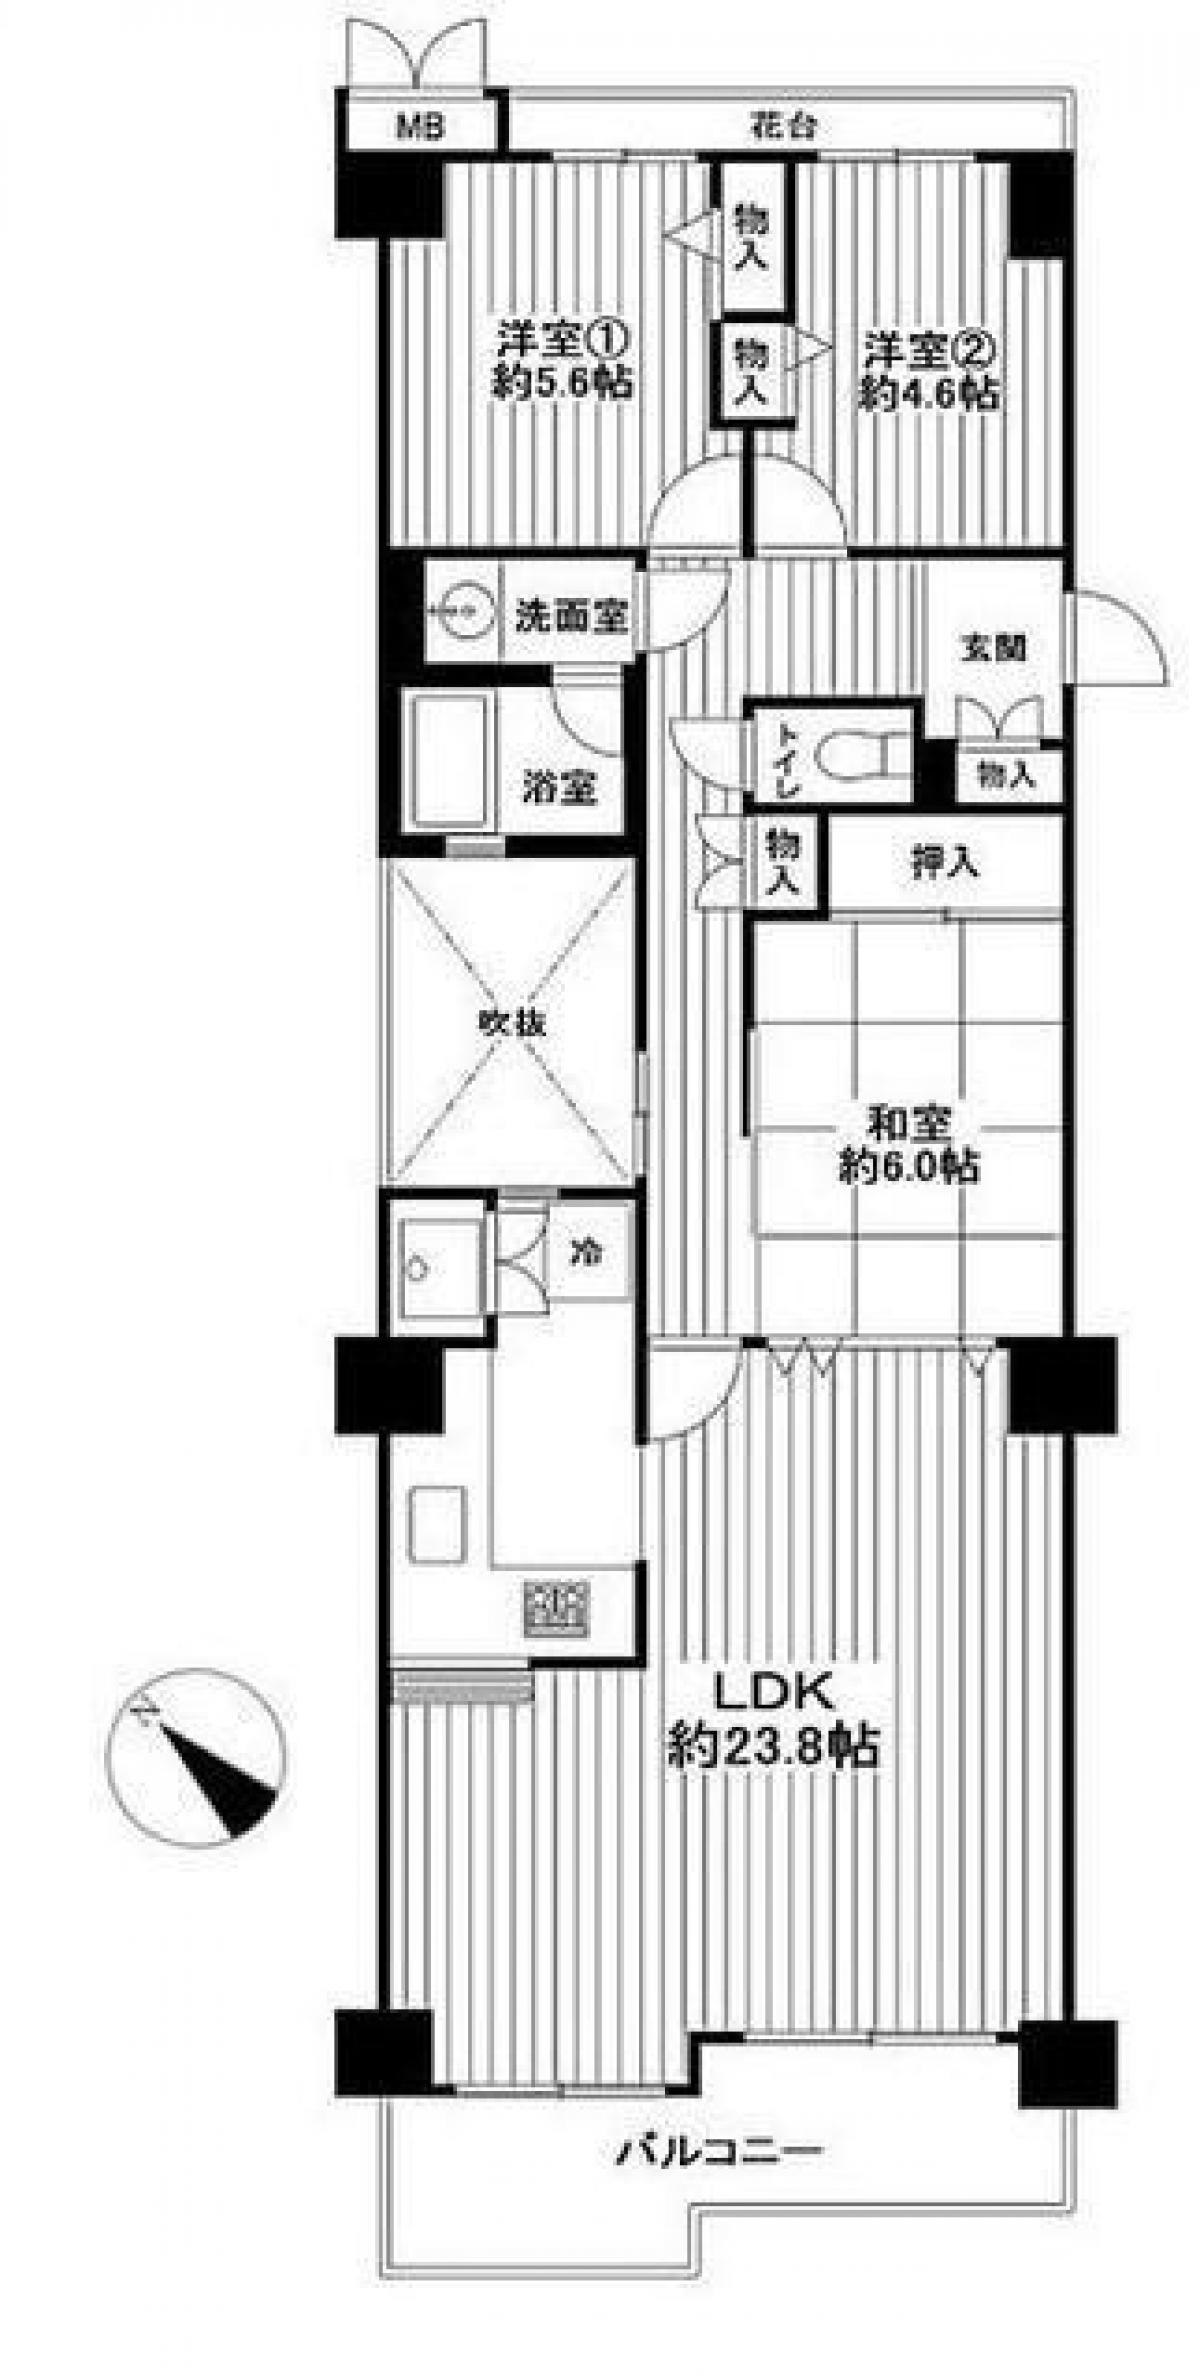 Picture of Apartment For Sale in Ikoma Shi, Nara, Japan